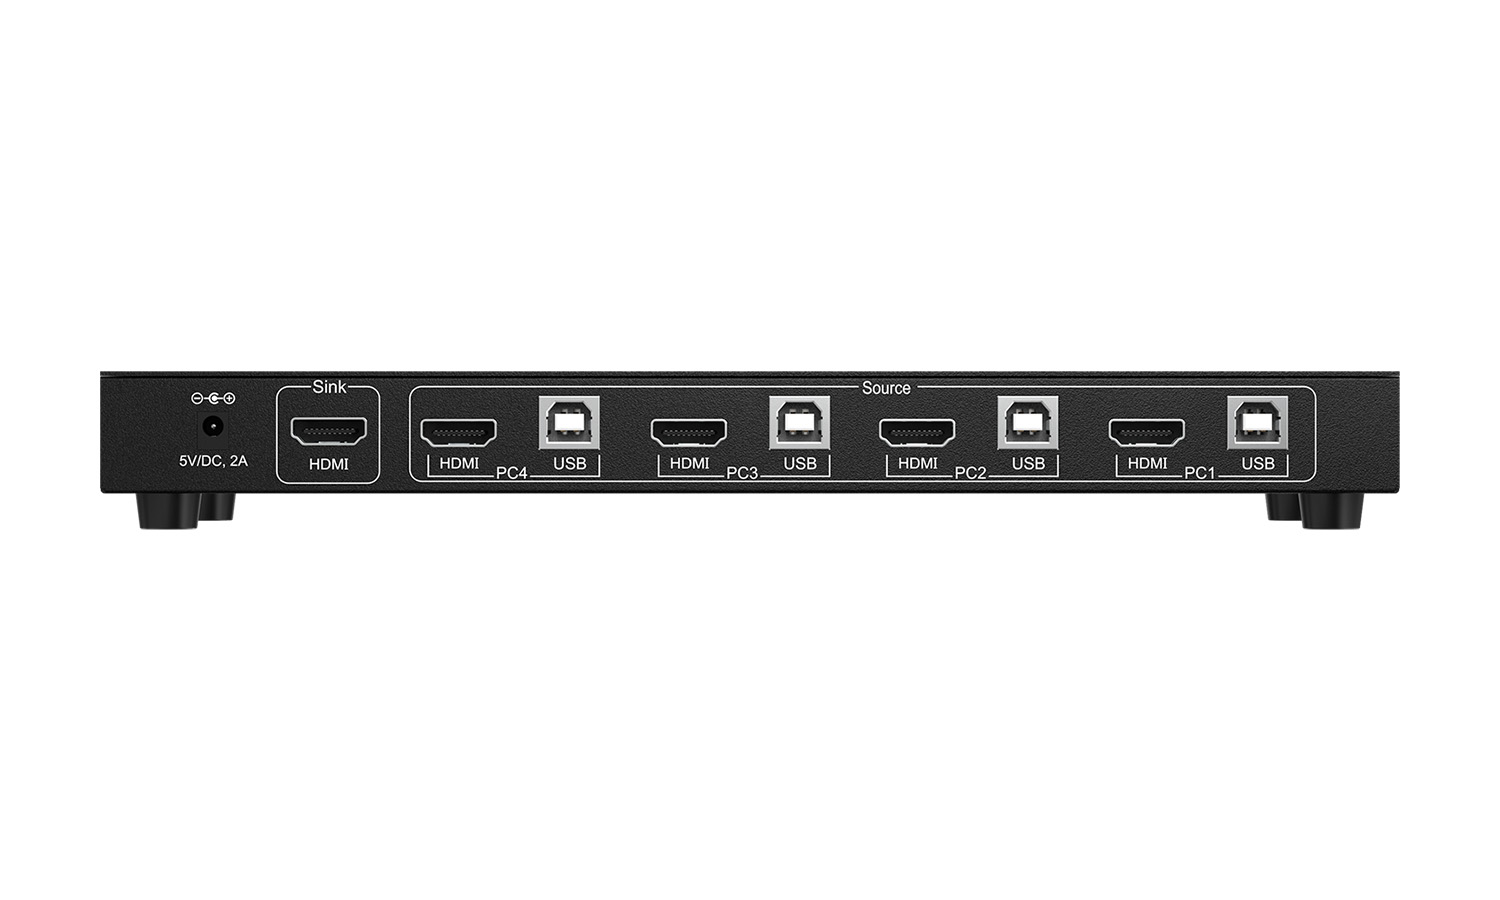 BZBGEAR BG-UHD-KVM41A 4X1 KVM Switch with USB2.0 Ports for Peripherals and 3.5mm Jacks for Audio Support